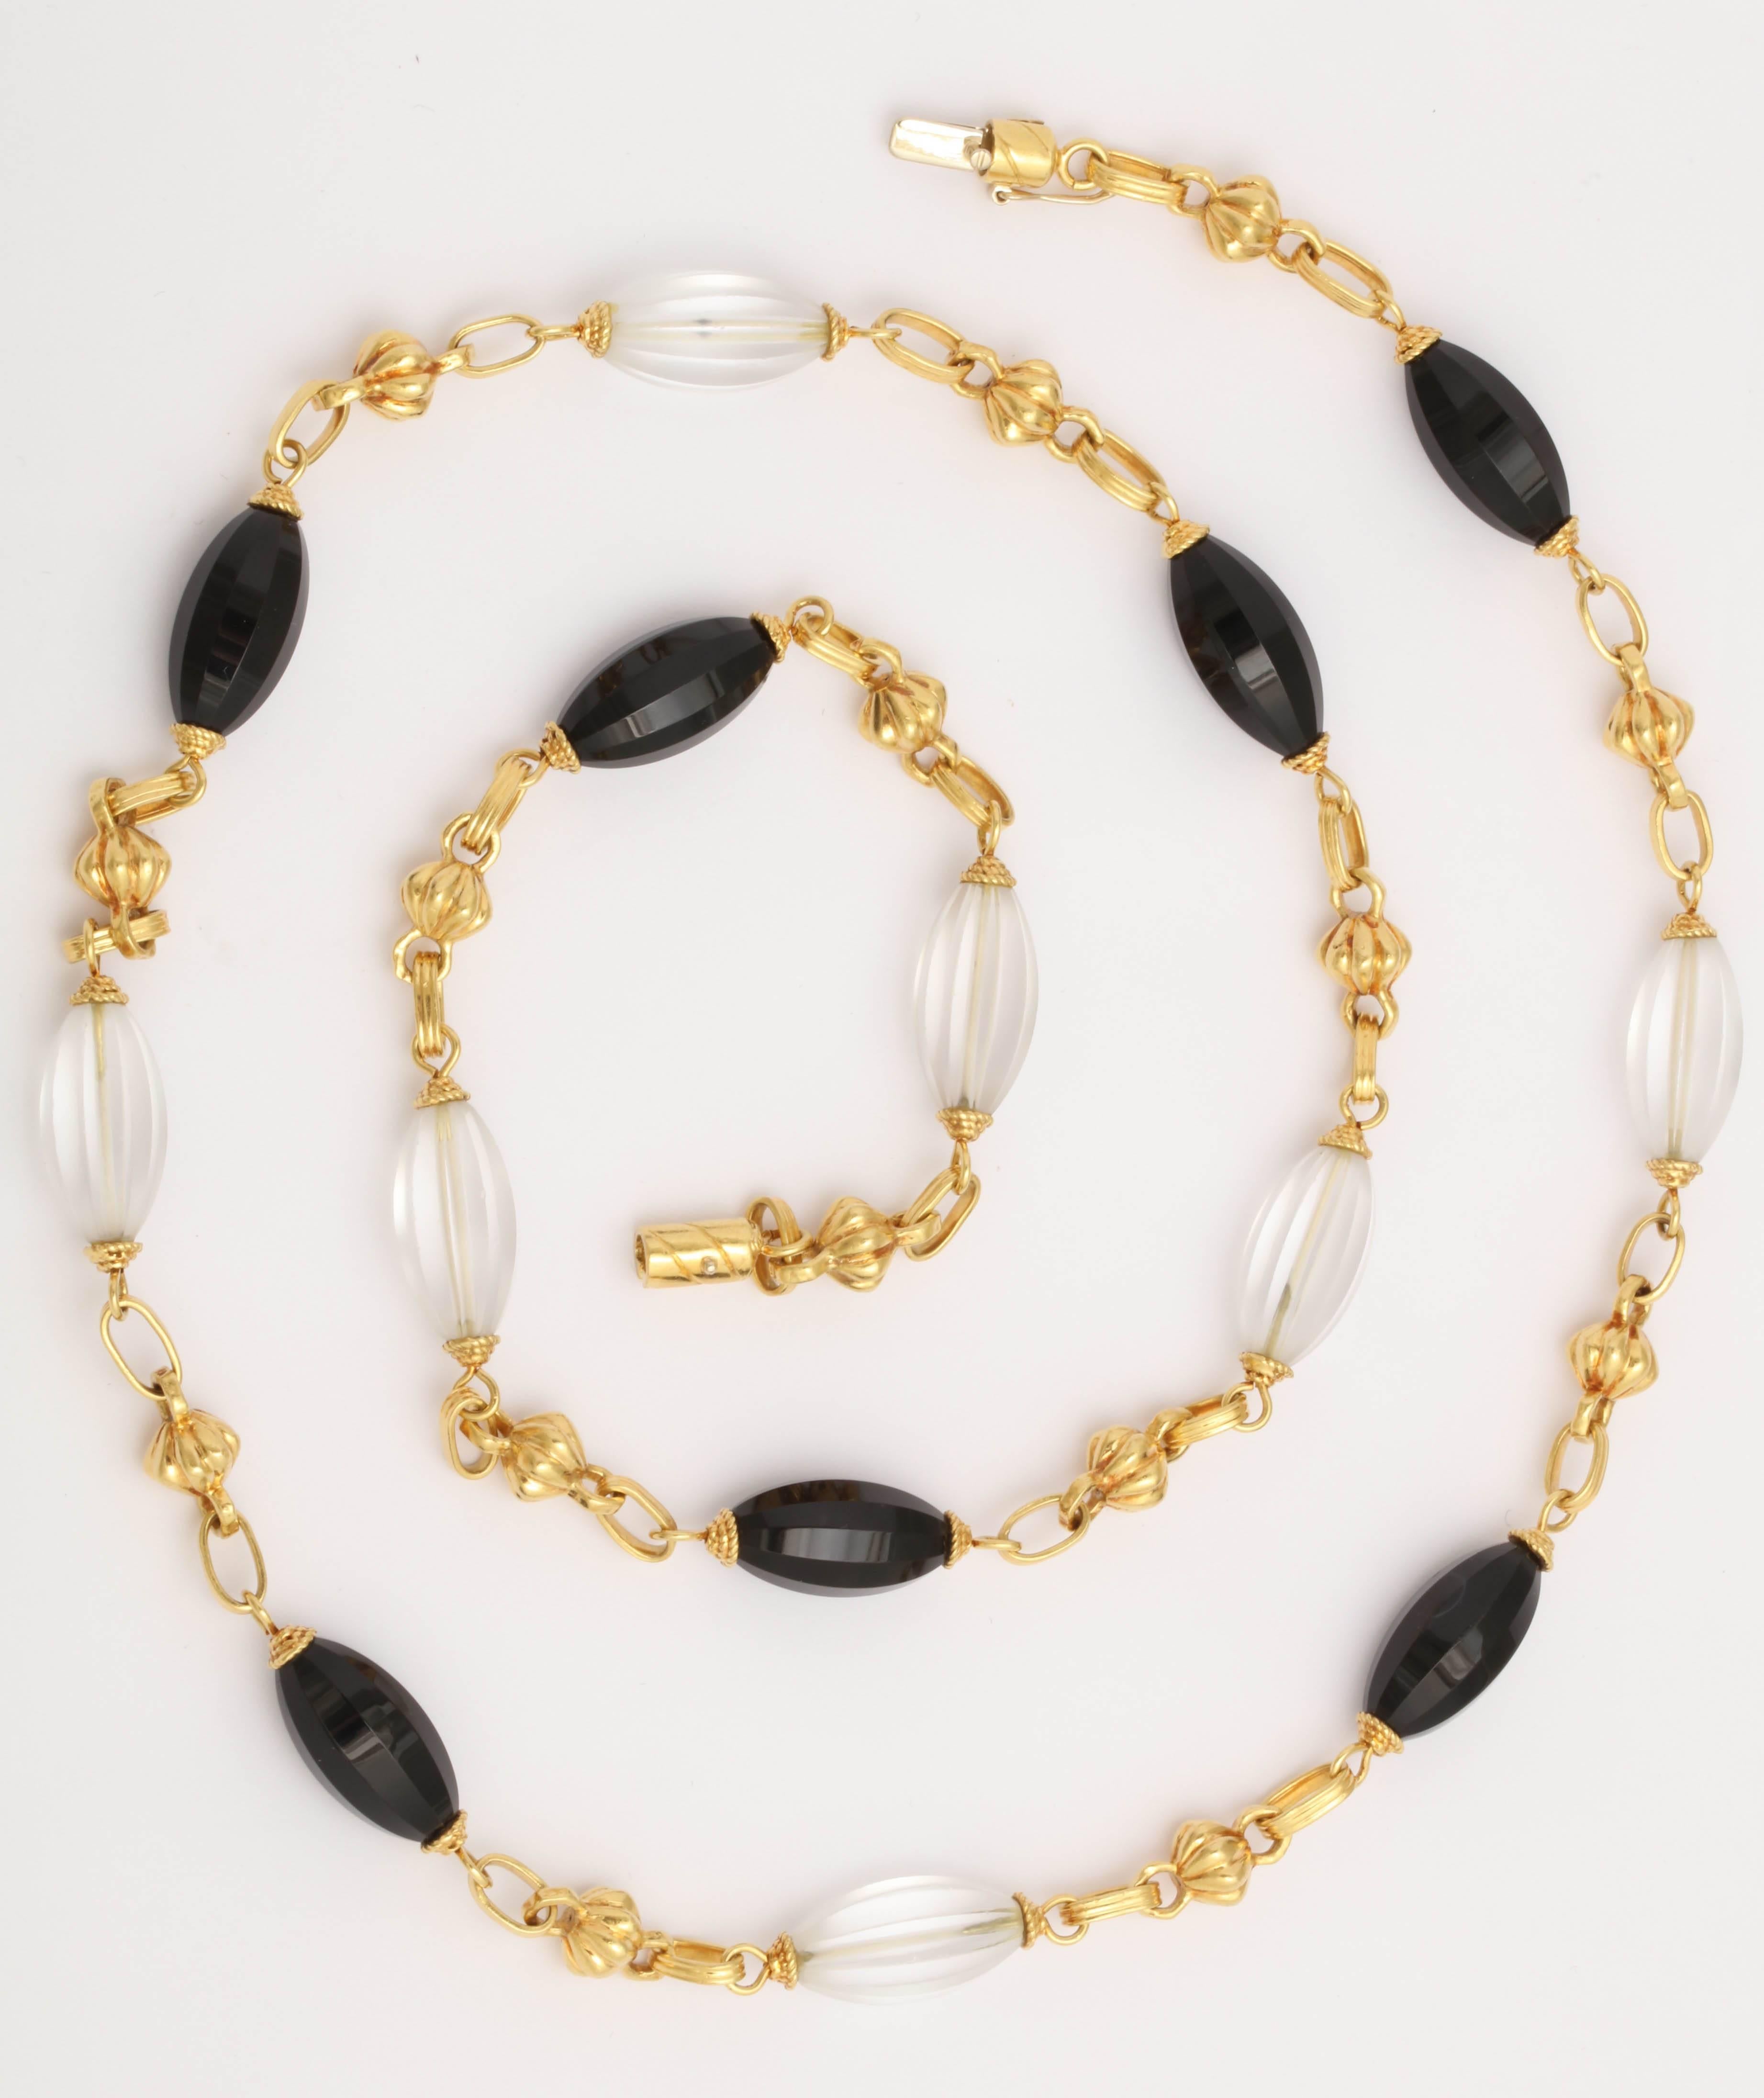 Chic long chain in 18kt Yellow Gold interspersed by 18kt YellowGold elements , 7 faceted Black onyx Beads & 7 melon shaped Rock Crystal Beads. Signed SF & dated 1970.  34.5" long - can be worn singly with other chains  or beads or  and